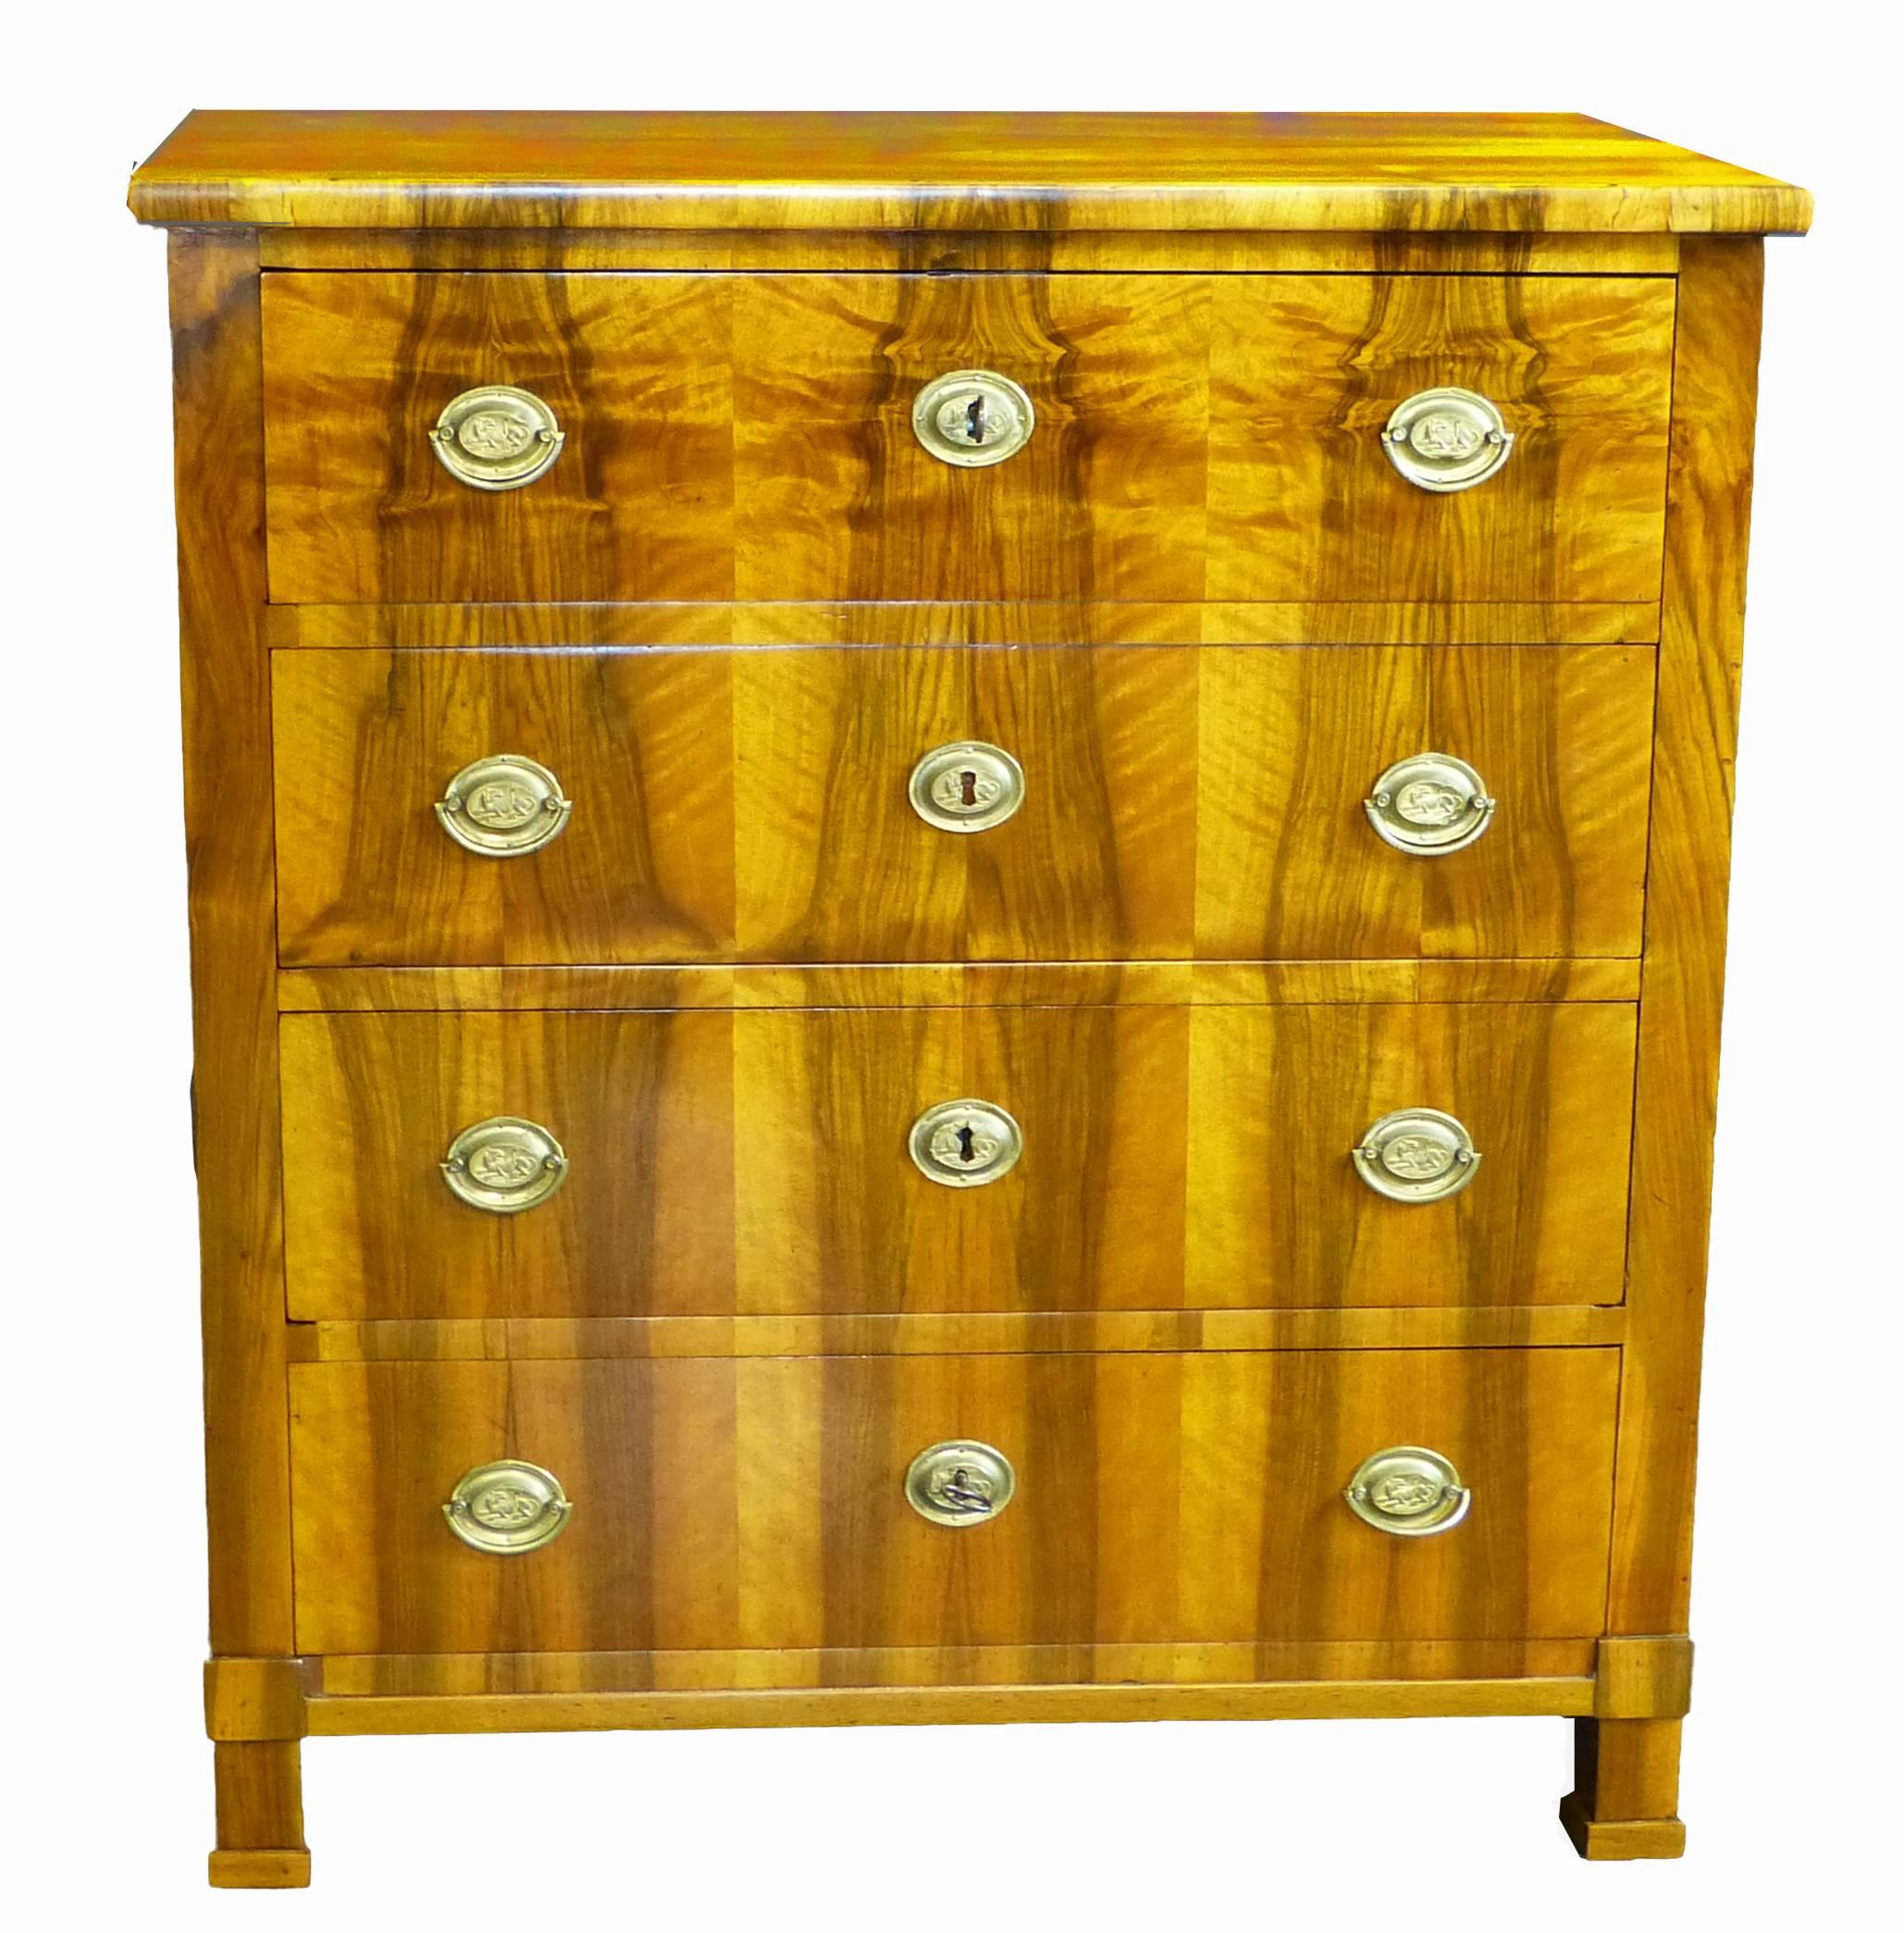 Commode Chest of Drawers Biedermeier 19th Century Olive wood - RETIREMENT SALE